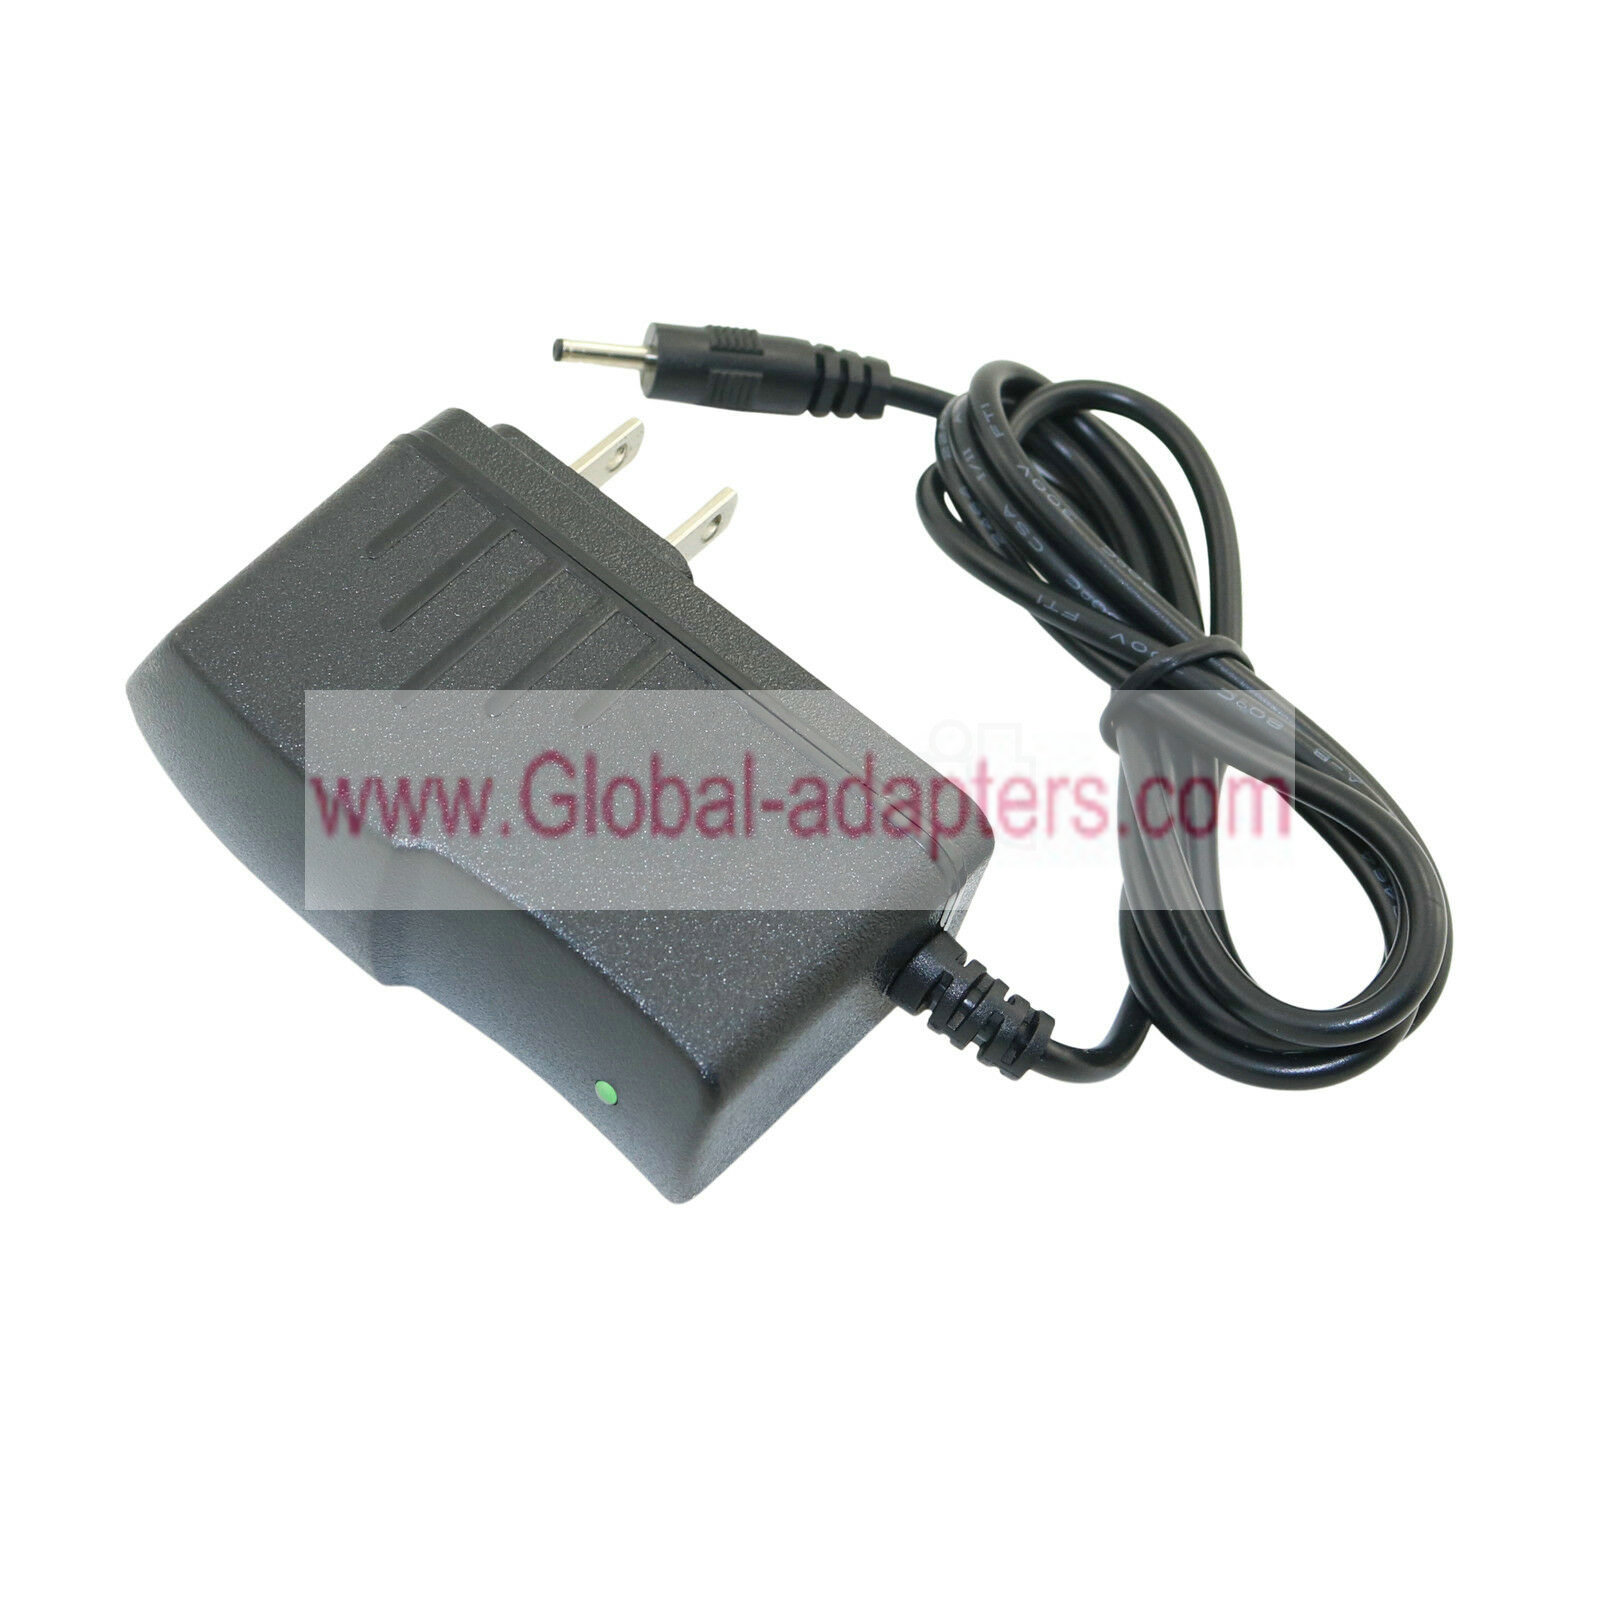 New 5V 2A AC/DC Adapter Power Supply Charger 3.5 x 1.35mm For Foscam CCTV IP Camera